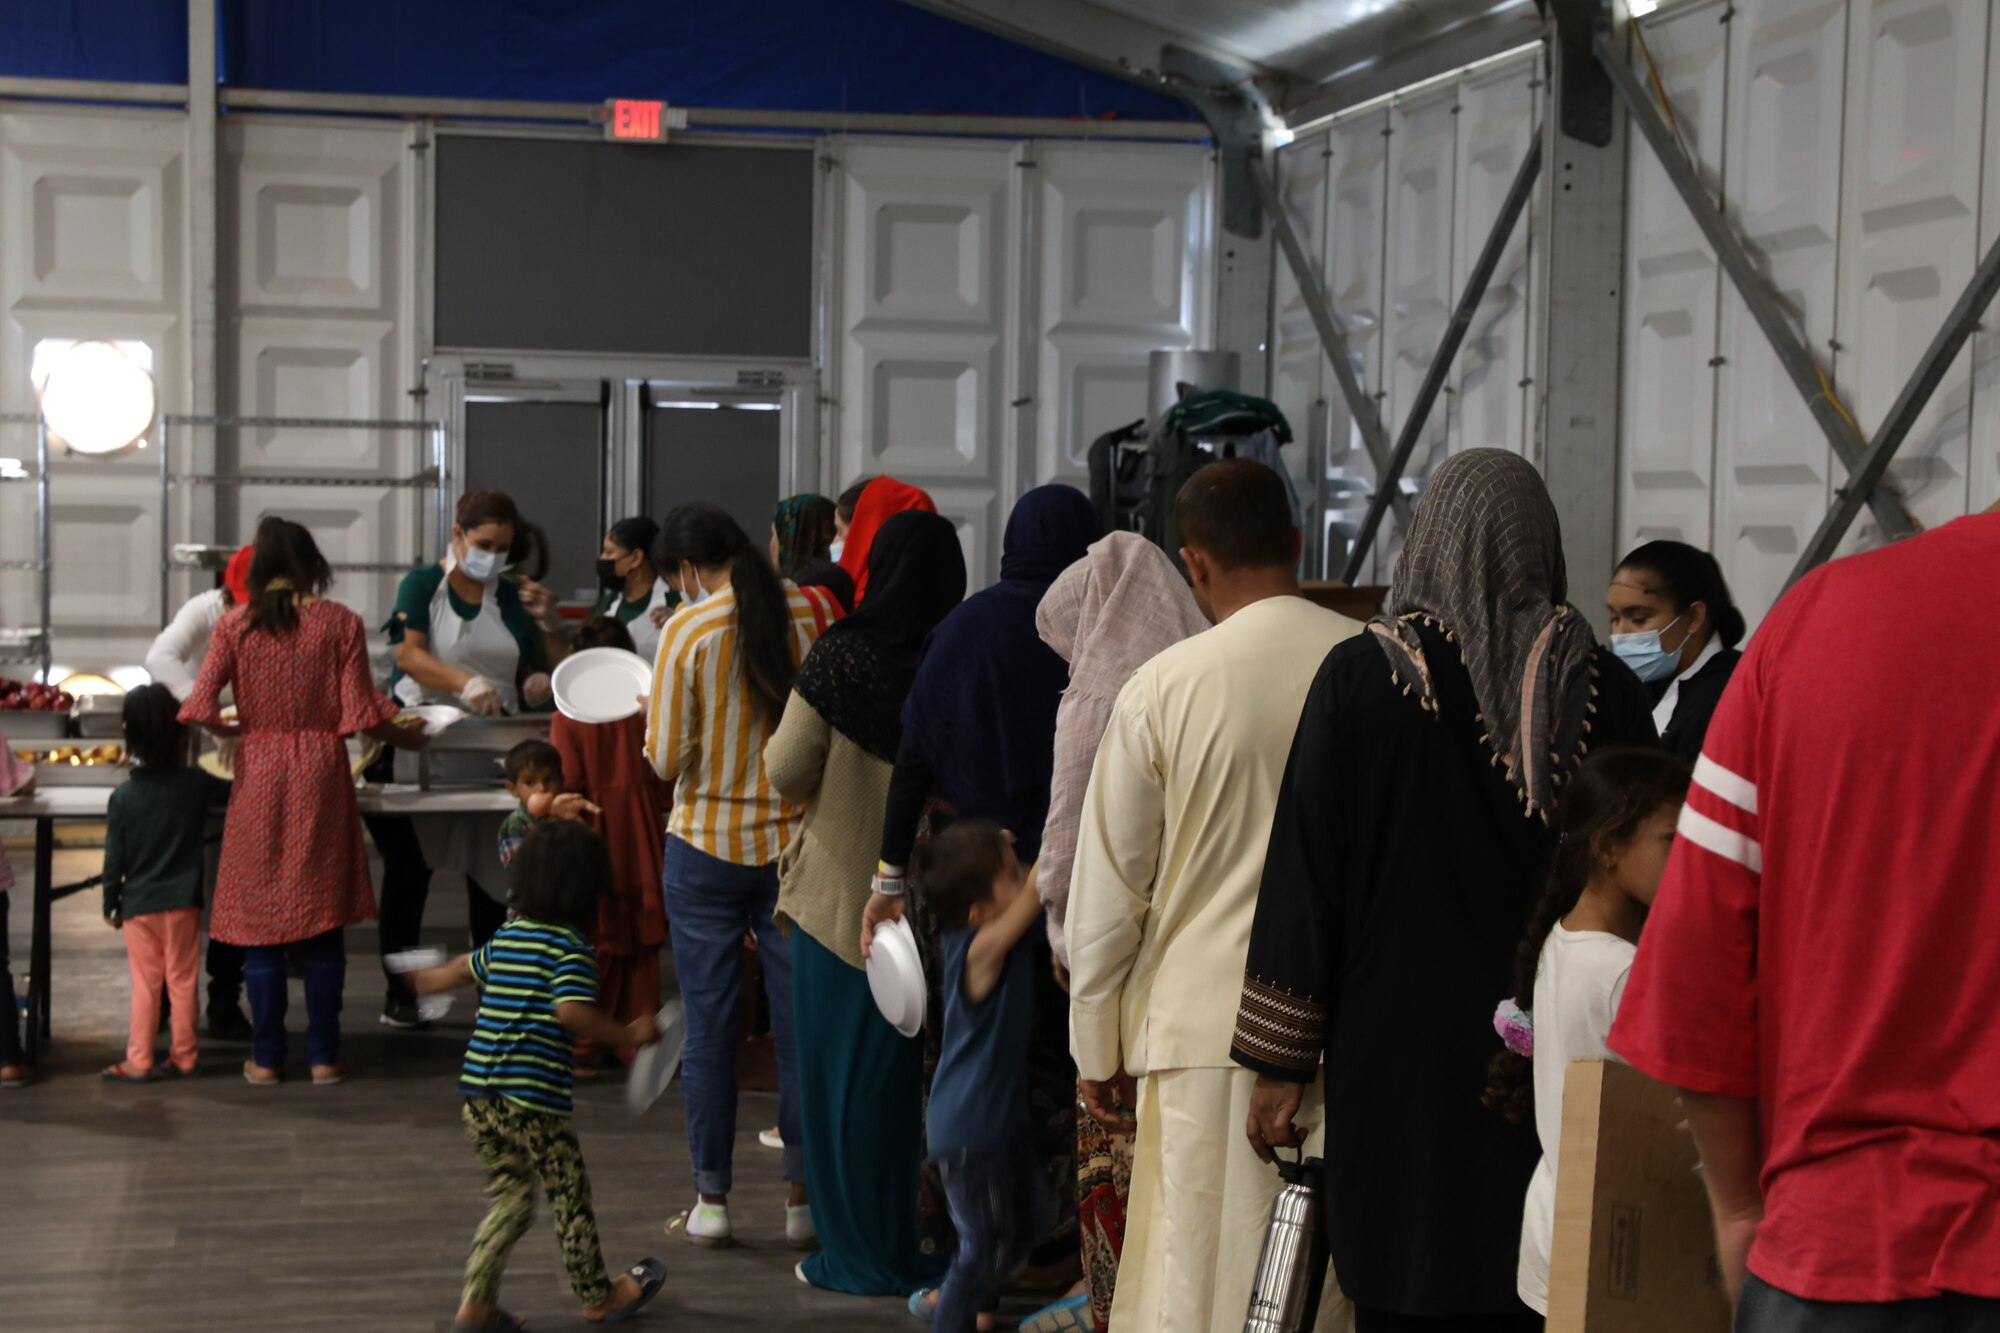 Afghan evacuees receive food at their new dining facility at Aman Omid Village Oct. 20, 2021, at Holloman Air Force, New Mexico. The Department of Defense, through the U.S. Northern Command, and in support of the Department of State and Department of Homeland Security, is providing transportation, temporary housing, medical screening, and general support for at least 50,000 Afghan evacuees at suitable facilities, in permanent or temporary structures, as quickly as possible. This initiative provides Afghan evacuees essential support at secure locations outside Afghanistan. (U.S. Army photo by Spc. Jose Escamilla)